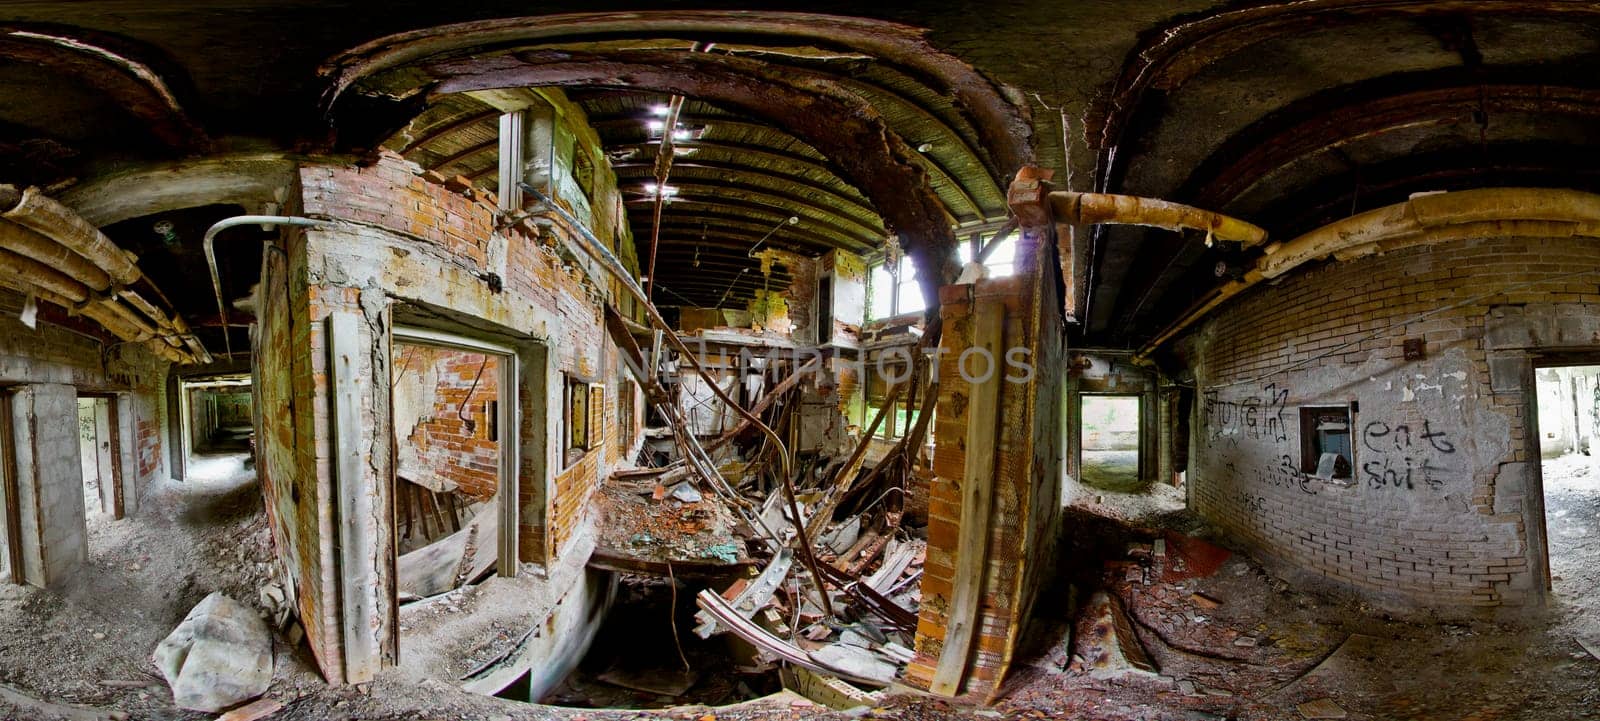 Abandoned TB Hospital in Lima, Ohio - Panoramic View of Decaying Interior by njproductions